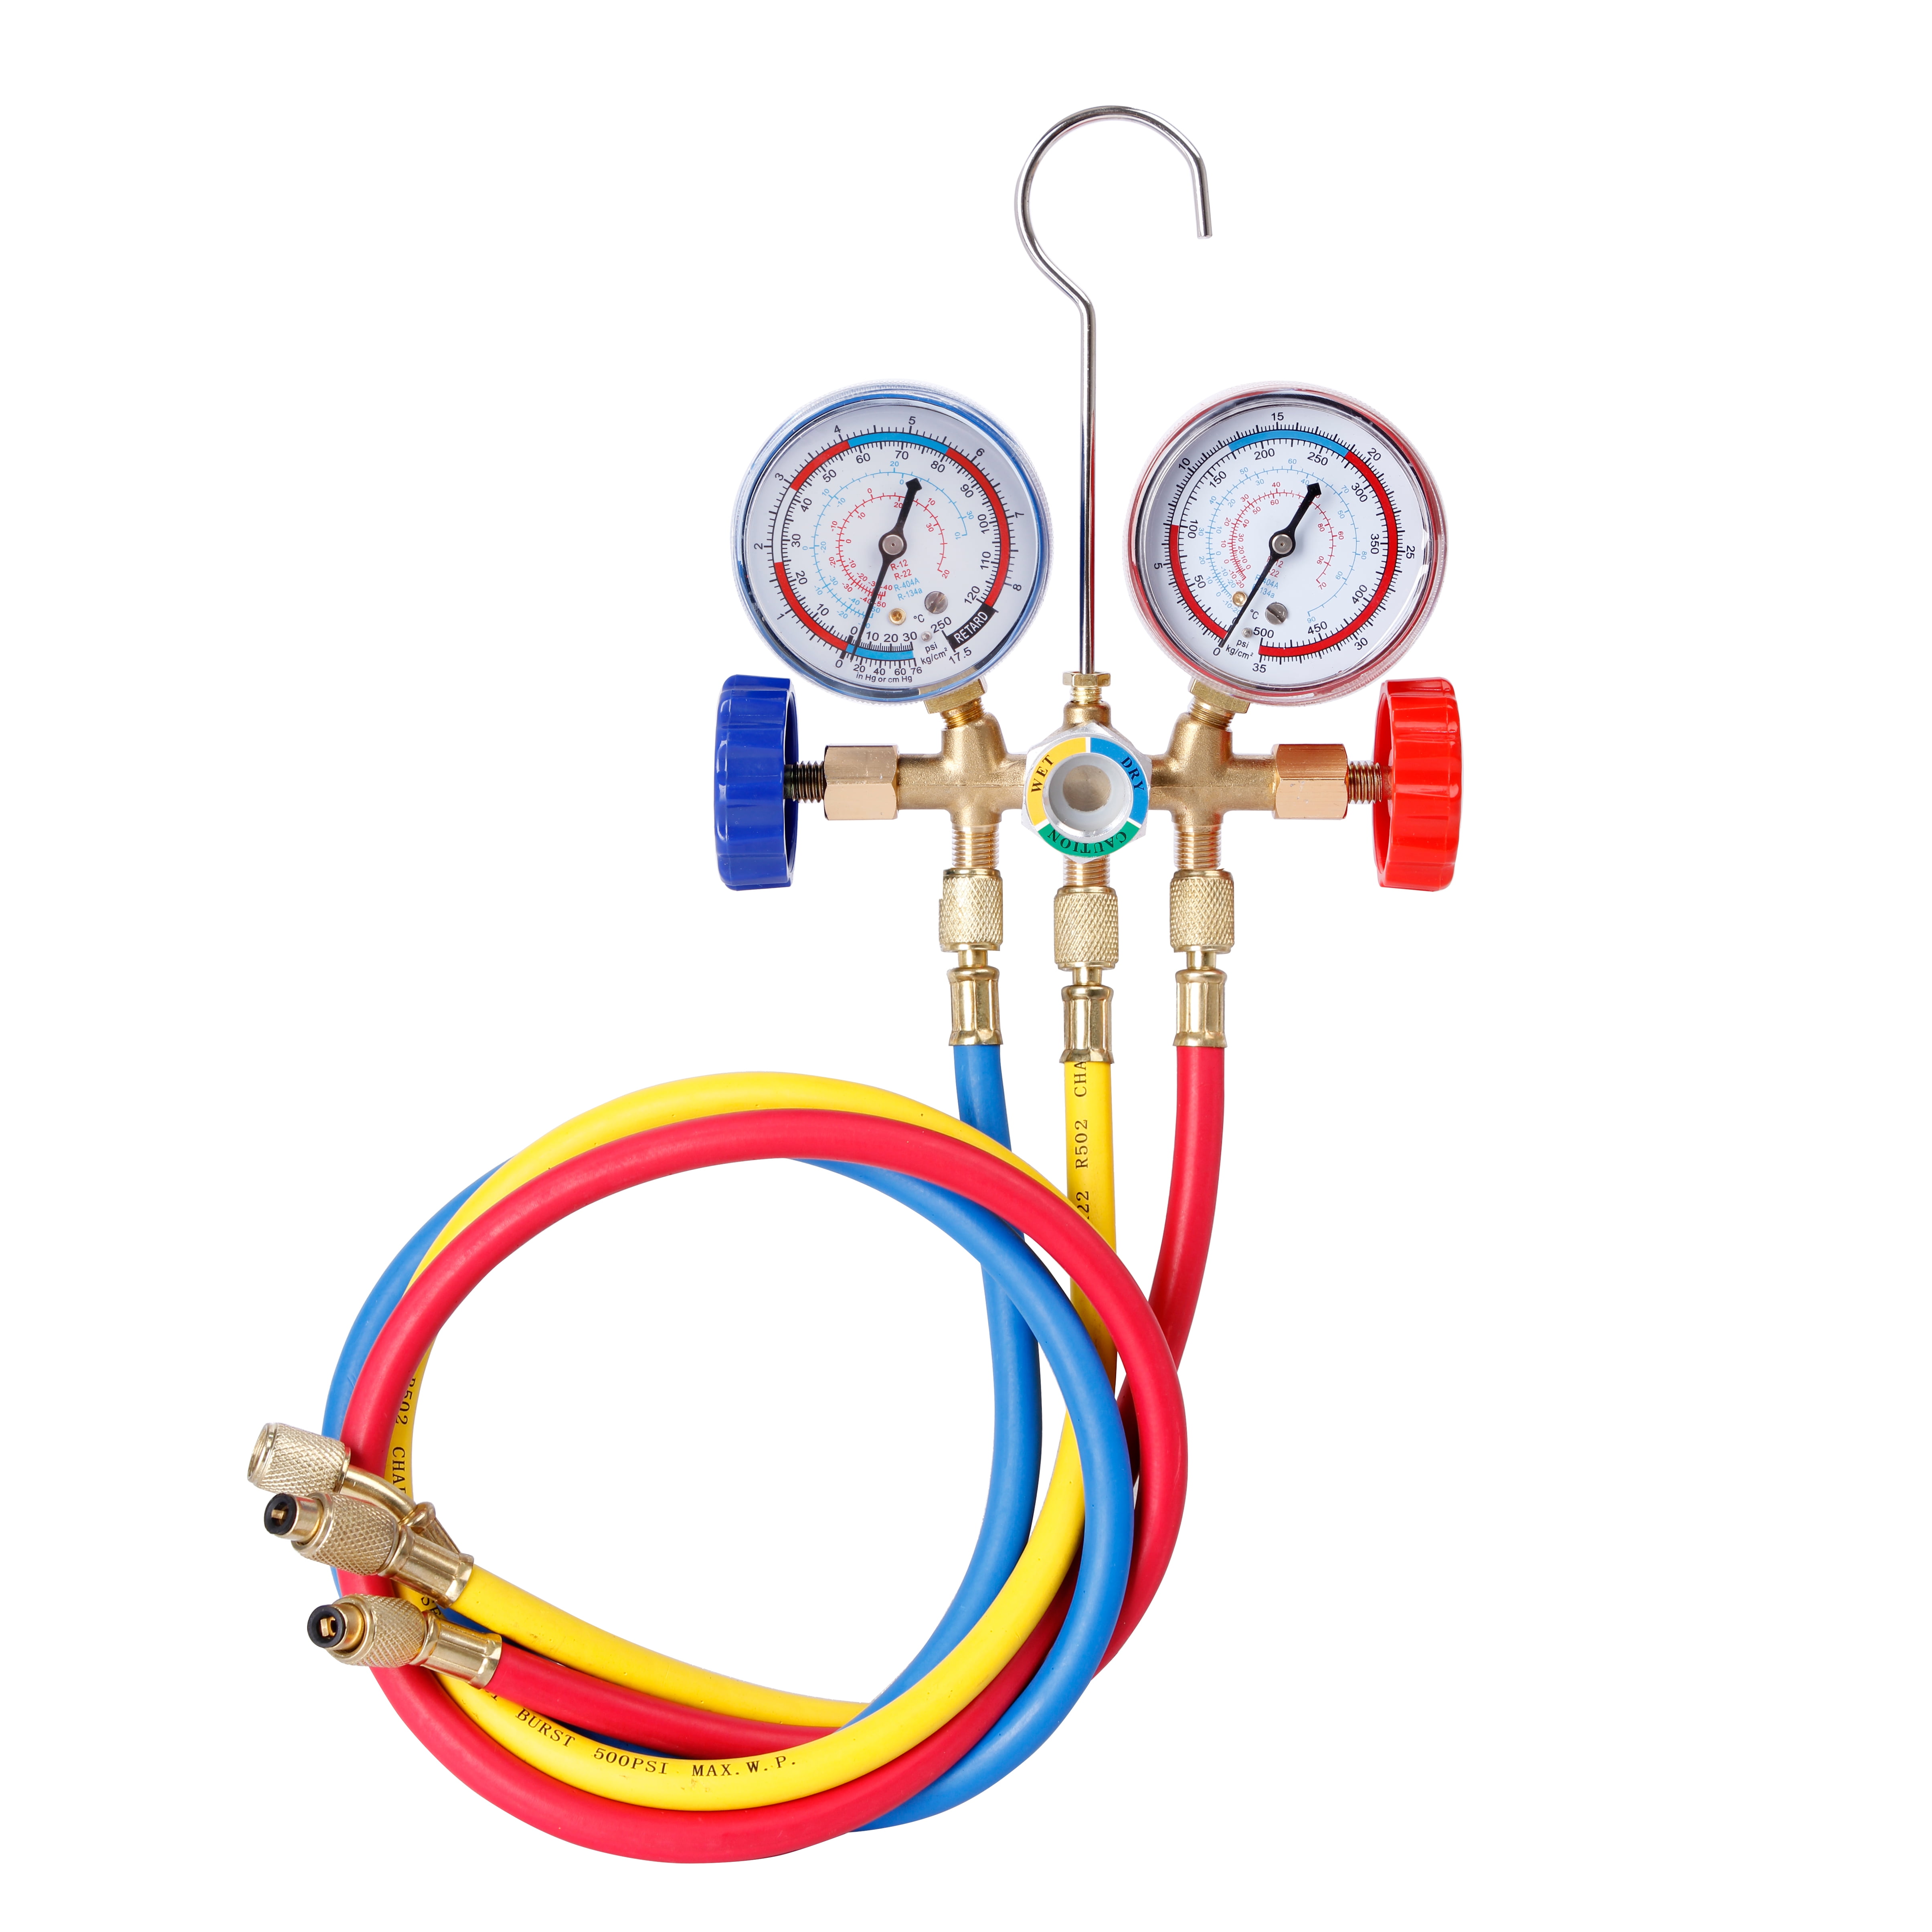 Diagnostic Manifold Gauge Set G1/4 Air Conditioning Repairing Tool G1/4 with 3Pcs Hose for R22 R134A R404A R407C 